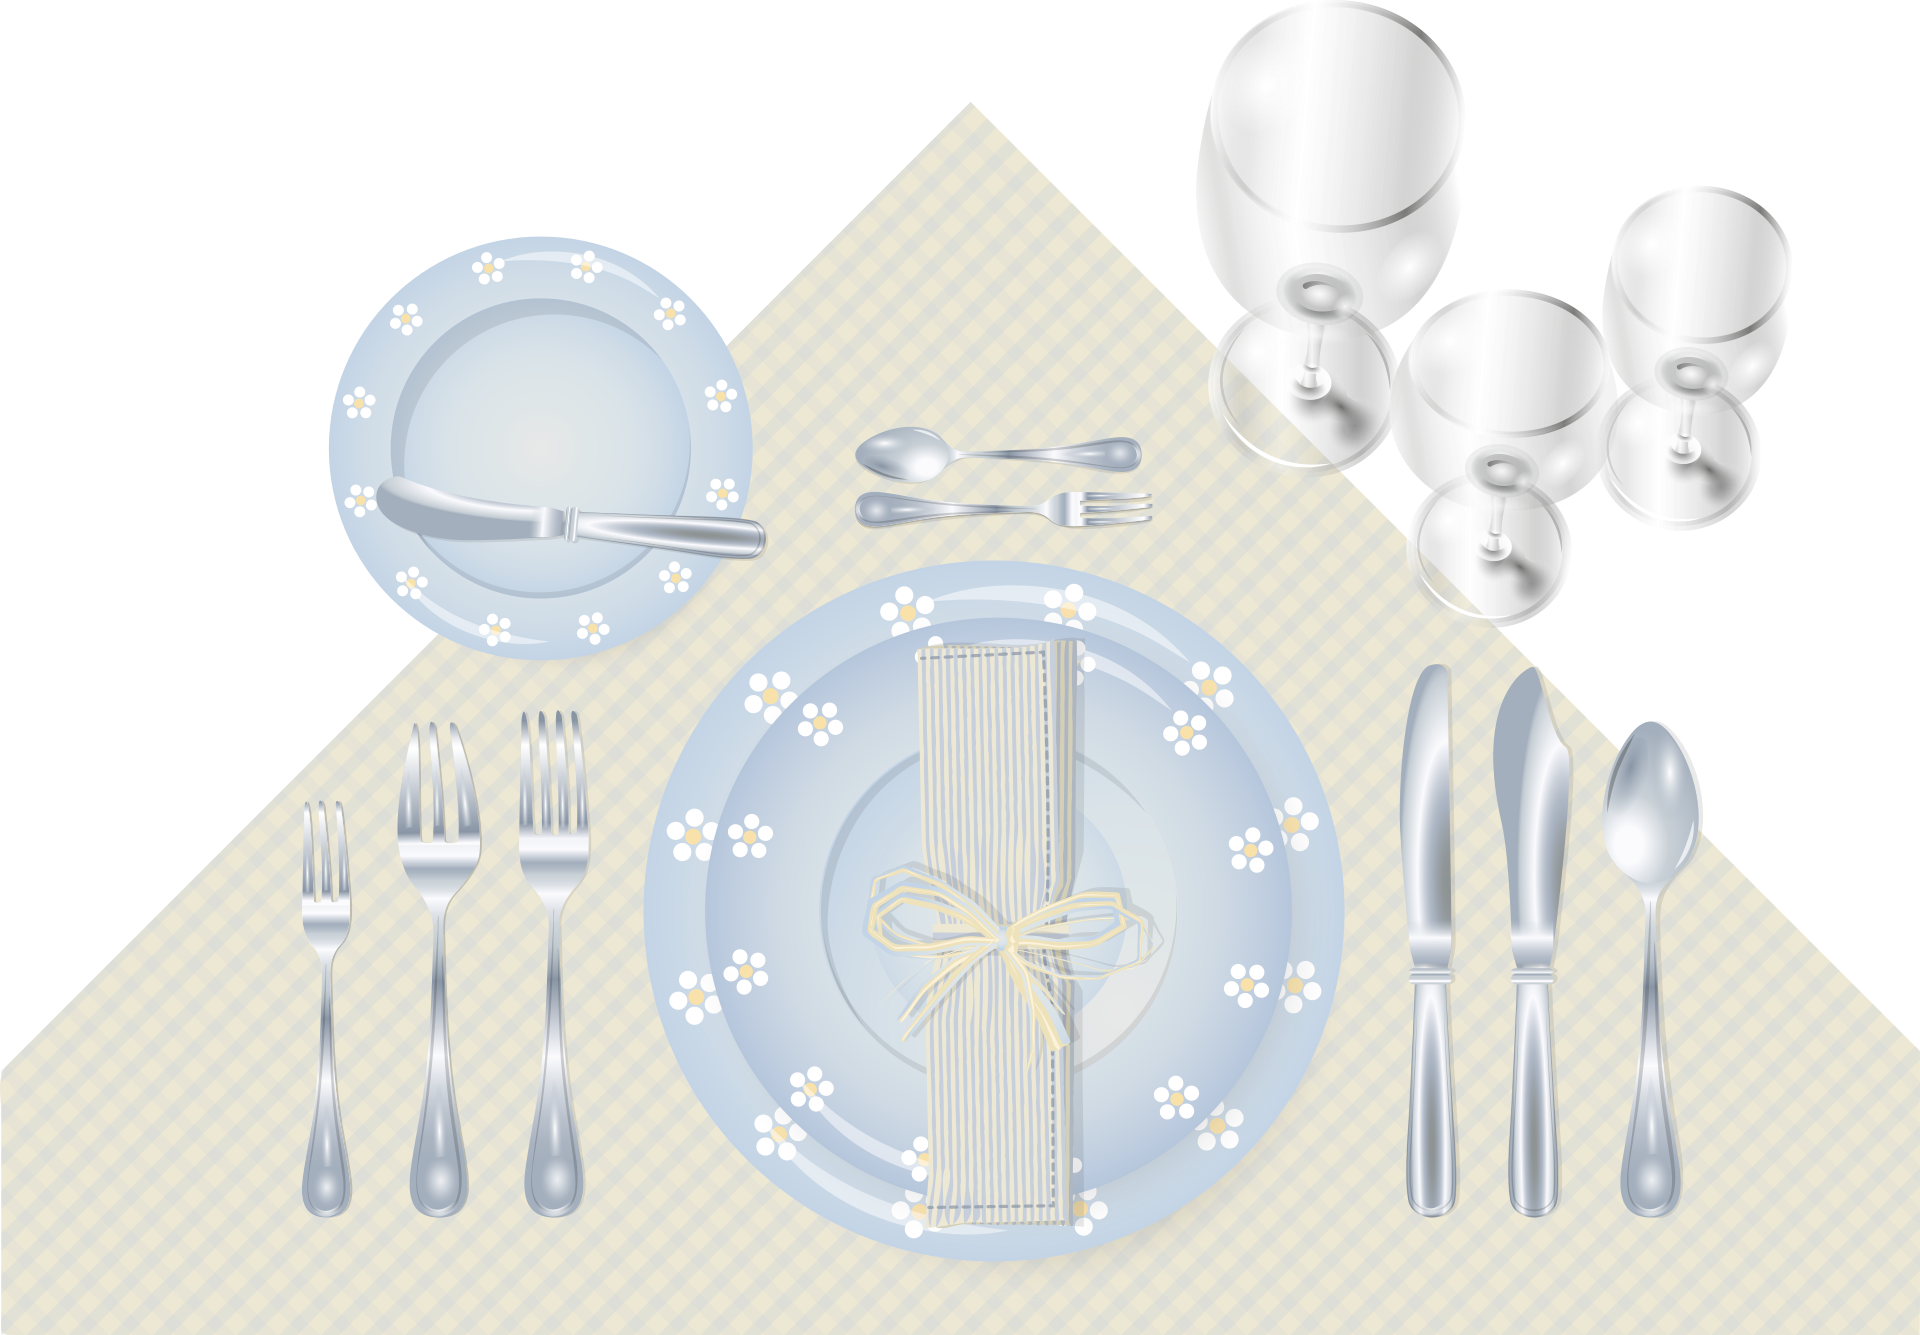 Setting of plates, forks, knives, and glasses